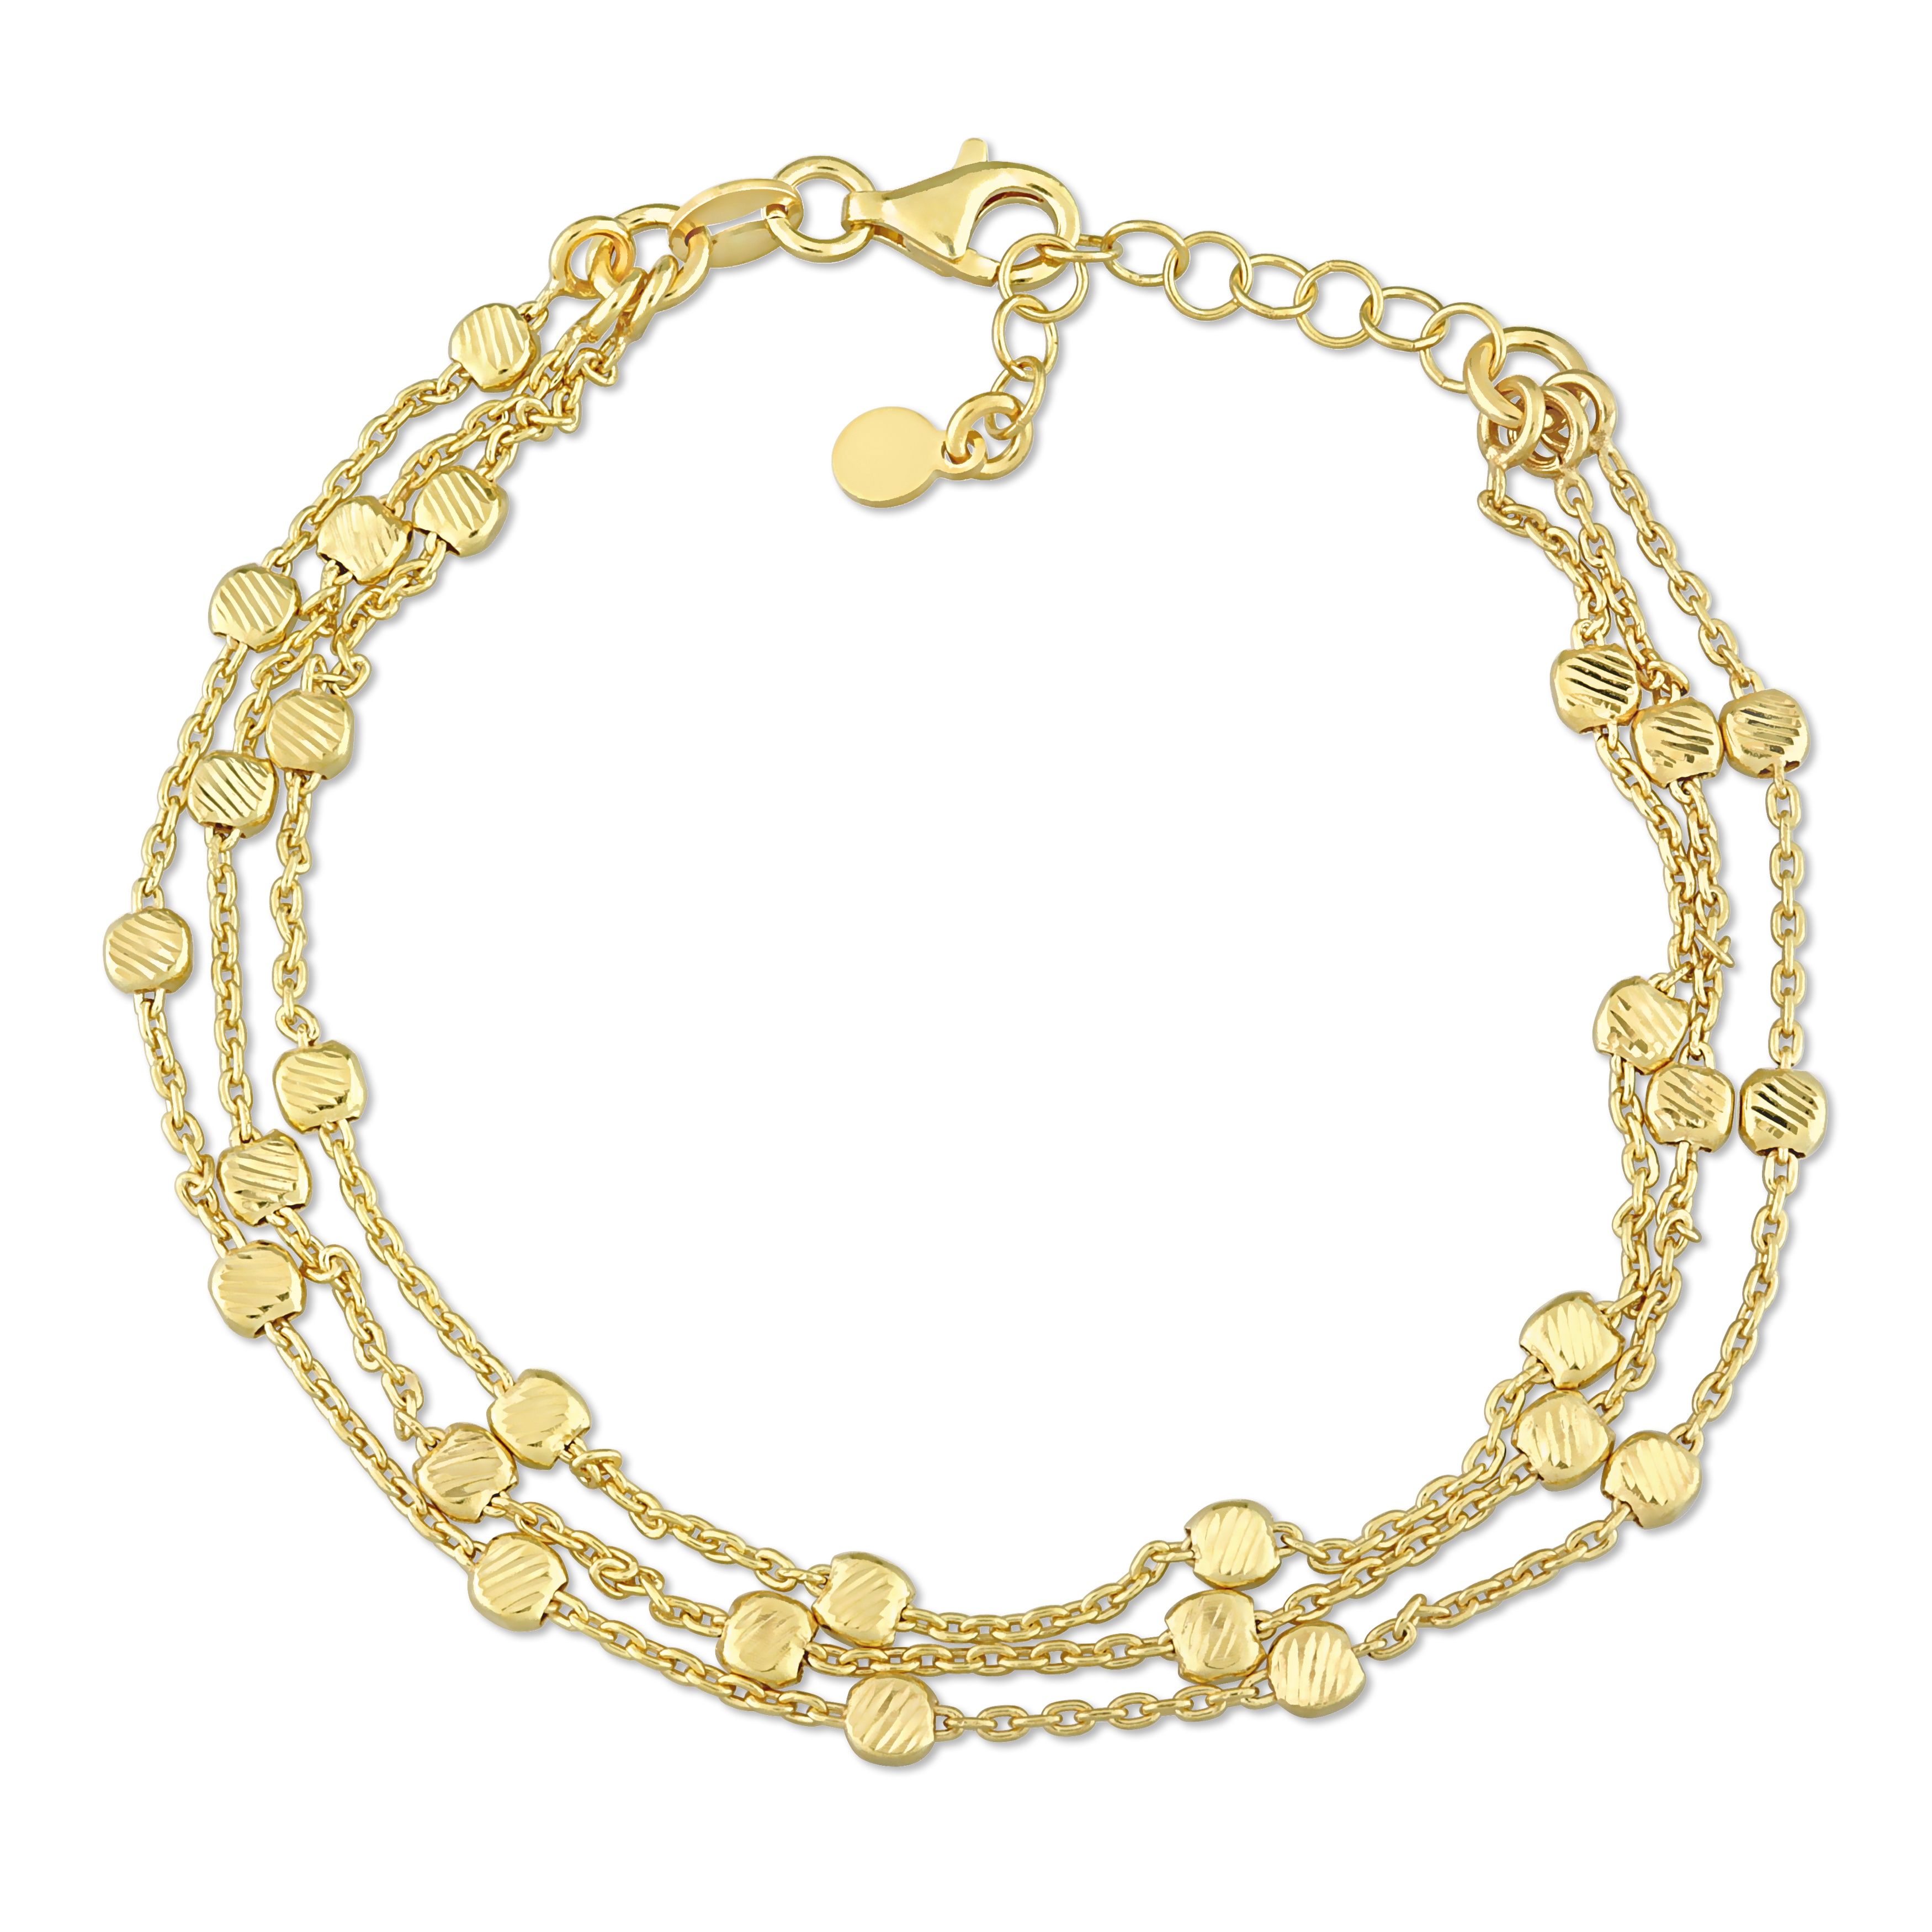 Multi-Strand Chain Bracelet in Yellow Plated Sterling Silver - 7.5 in.